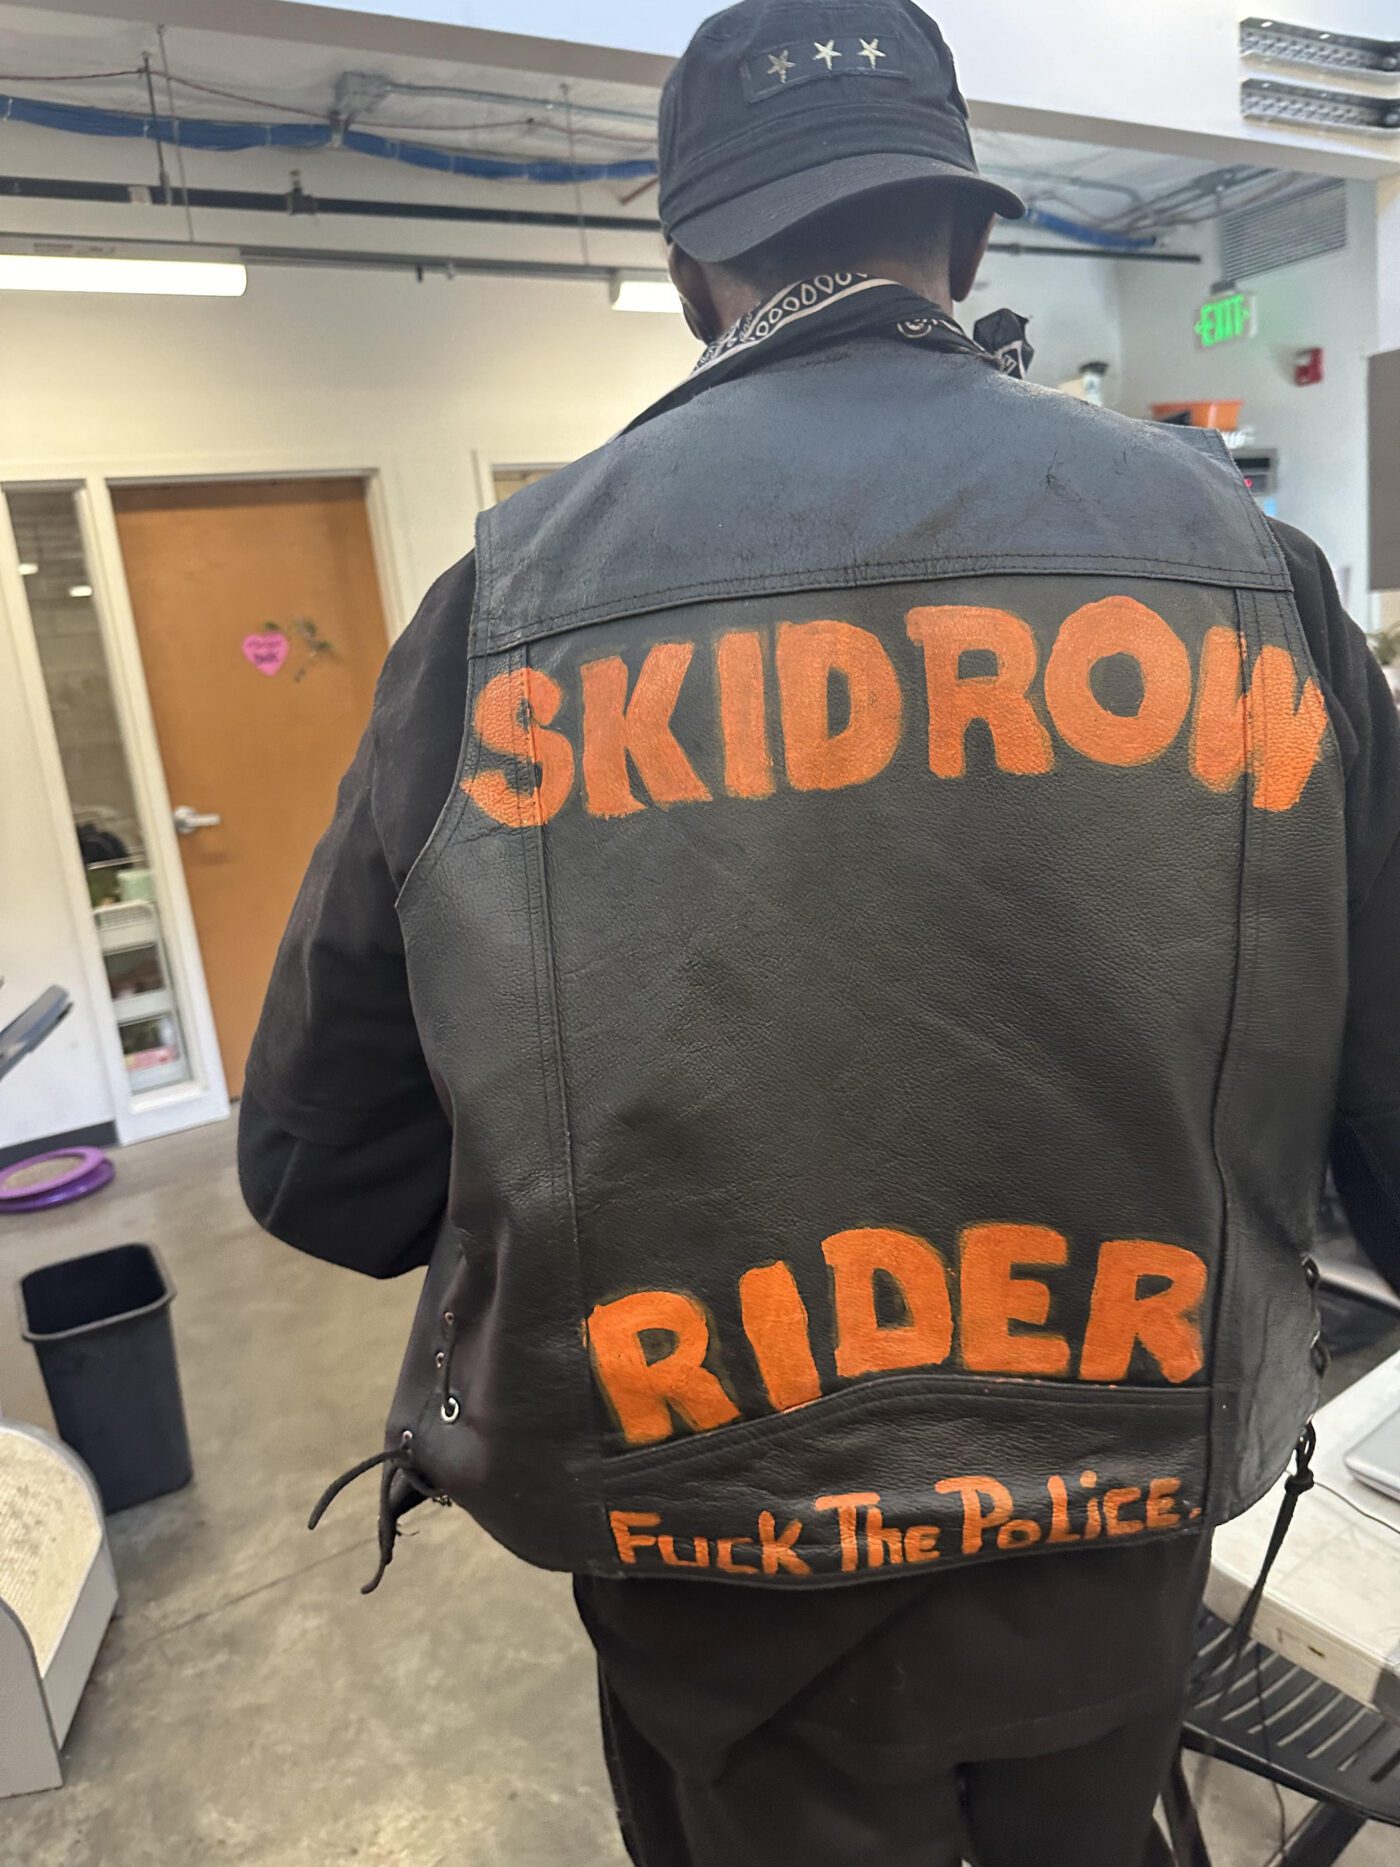 Skidrow-Rider-Fuck-the-Police-man-in-painted-jacket-by-LA-CAN-1400x1867, Treatment not tents? Vote NO on Prop 1 and Prop F, World News & Views 